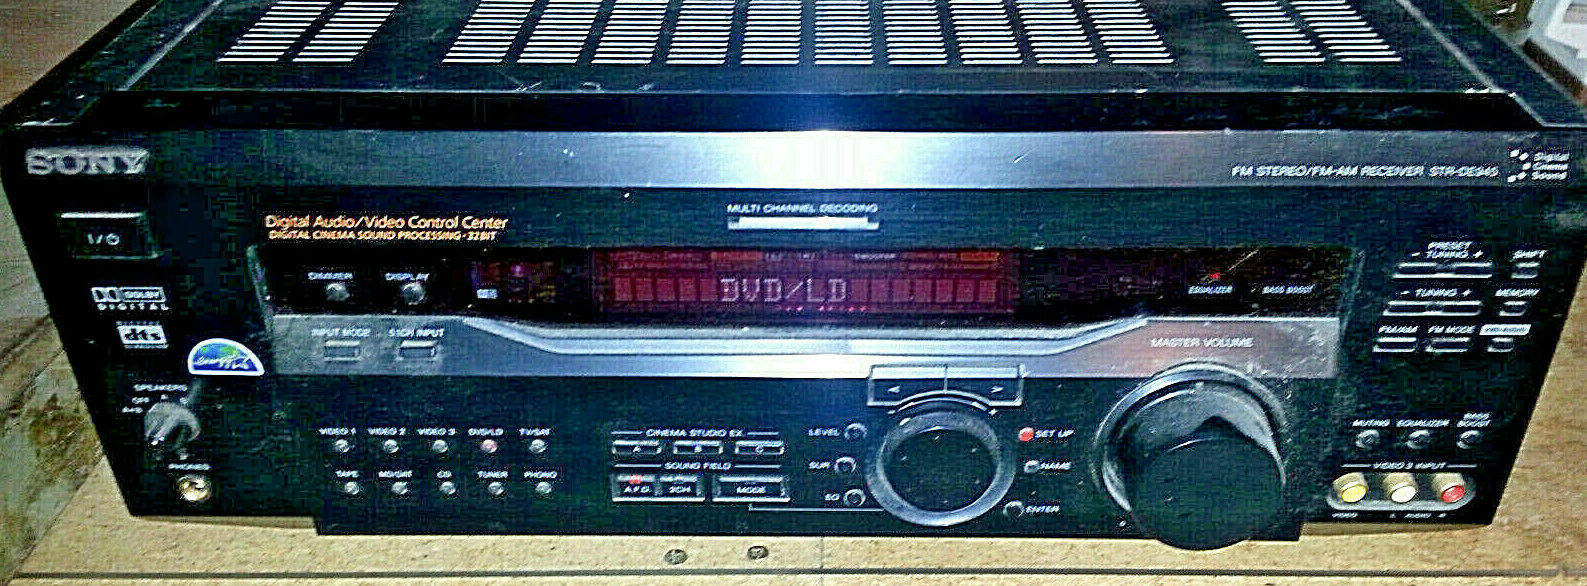 Sony STR-DE945 Stereo Surround Receiver only